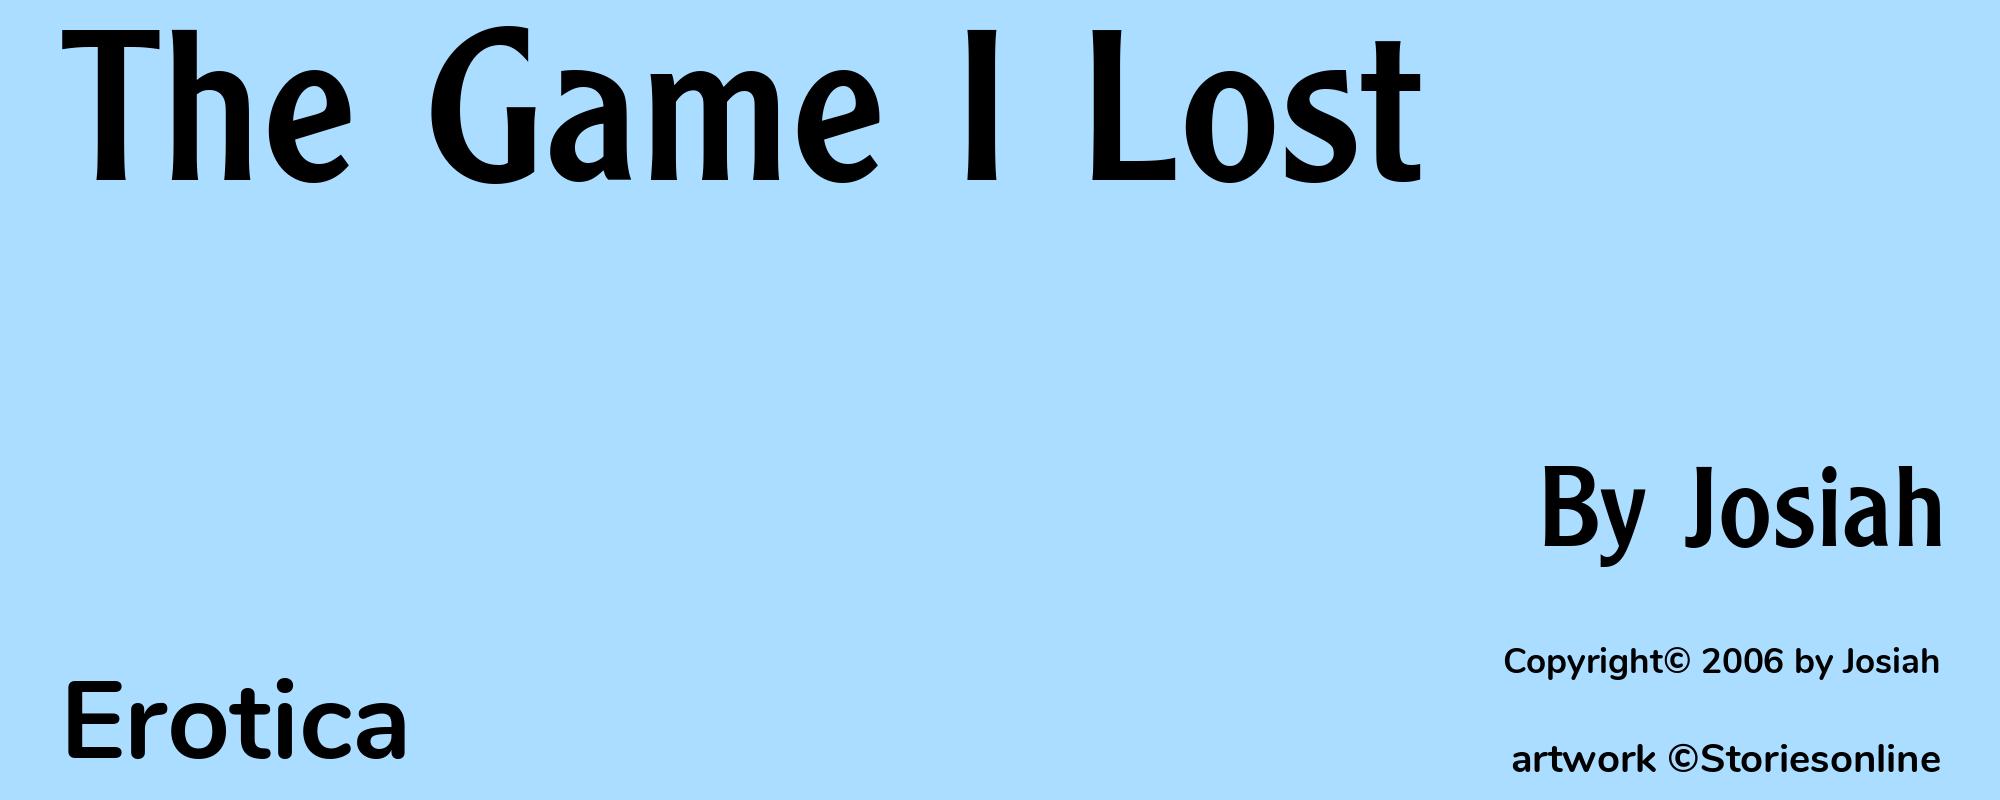 The Game I Lost - Cover